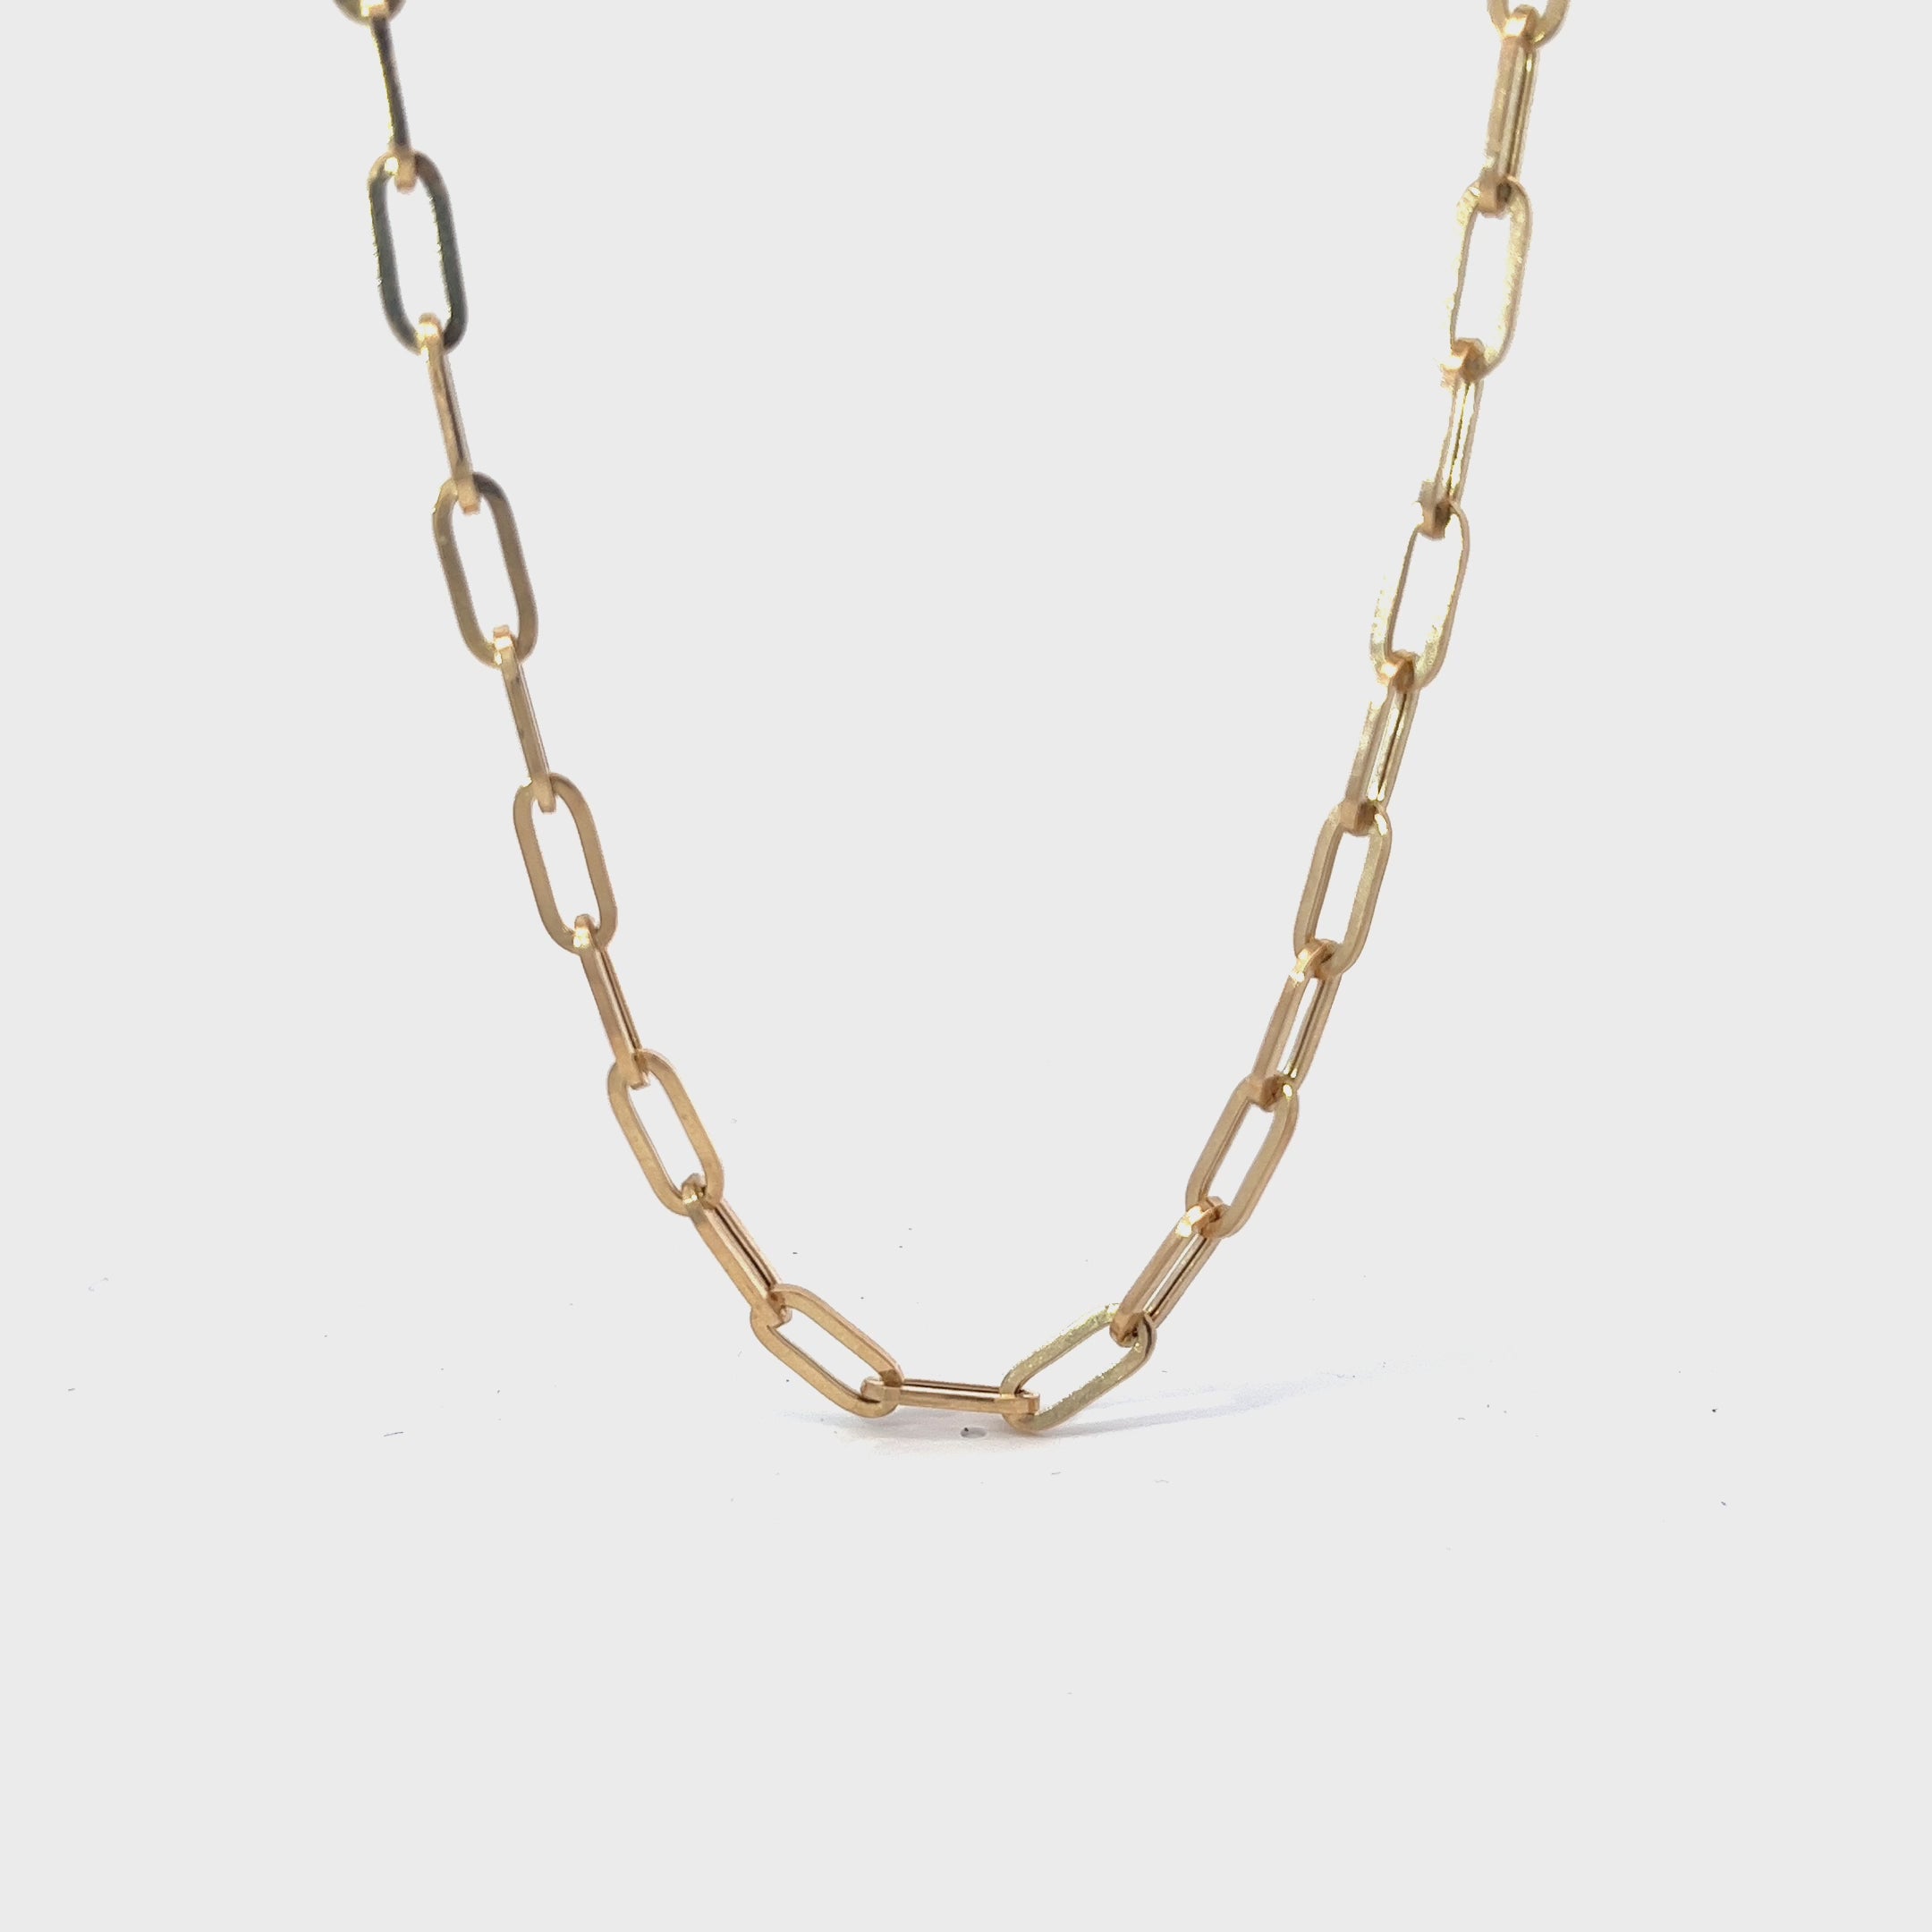 Ladies 14k yellow gold paperclip chain